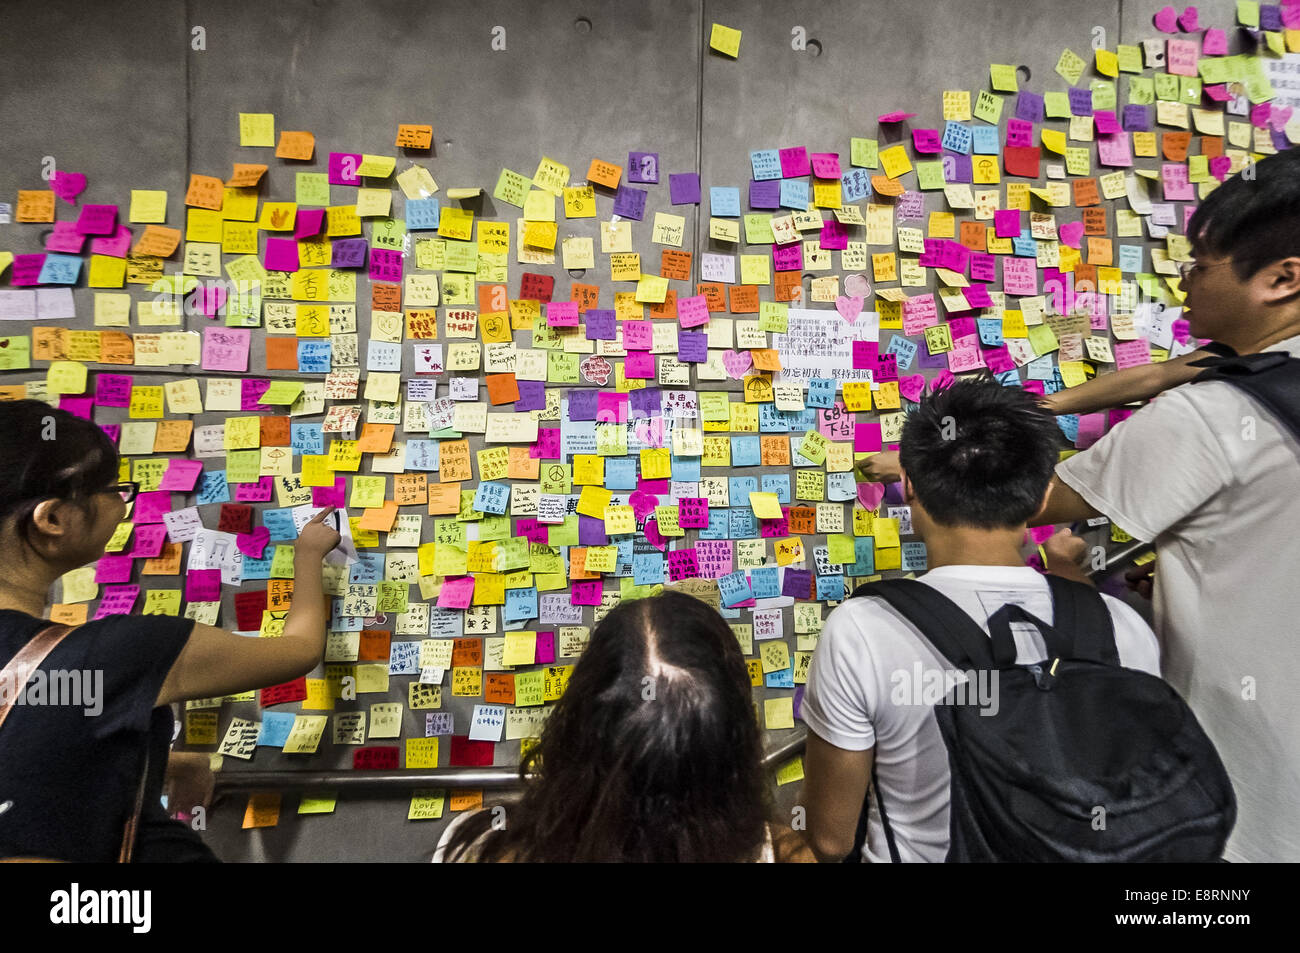 Hong Kong, Hong Kong. 2nd Oct, 2014. Protestors and supporters have turned the steps leading up to Tamar Park into an impromptu message board where they write and share their messages of hope and intent for gaining true democracy and universal suffrage in Hong Kong for the 2017 elections. (Credit Image: © Chris Lusher/zReportage.com via ZUMA Press) Stock Photo